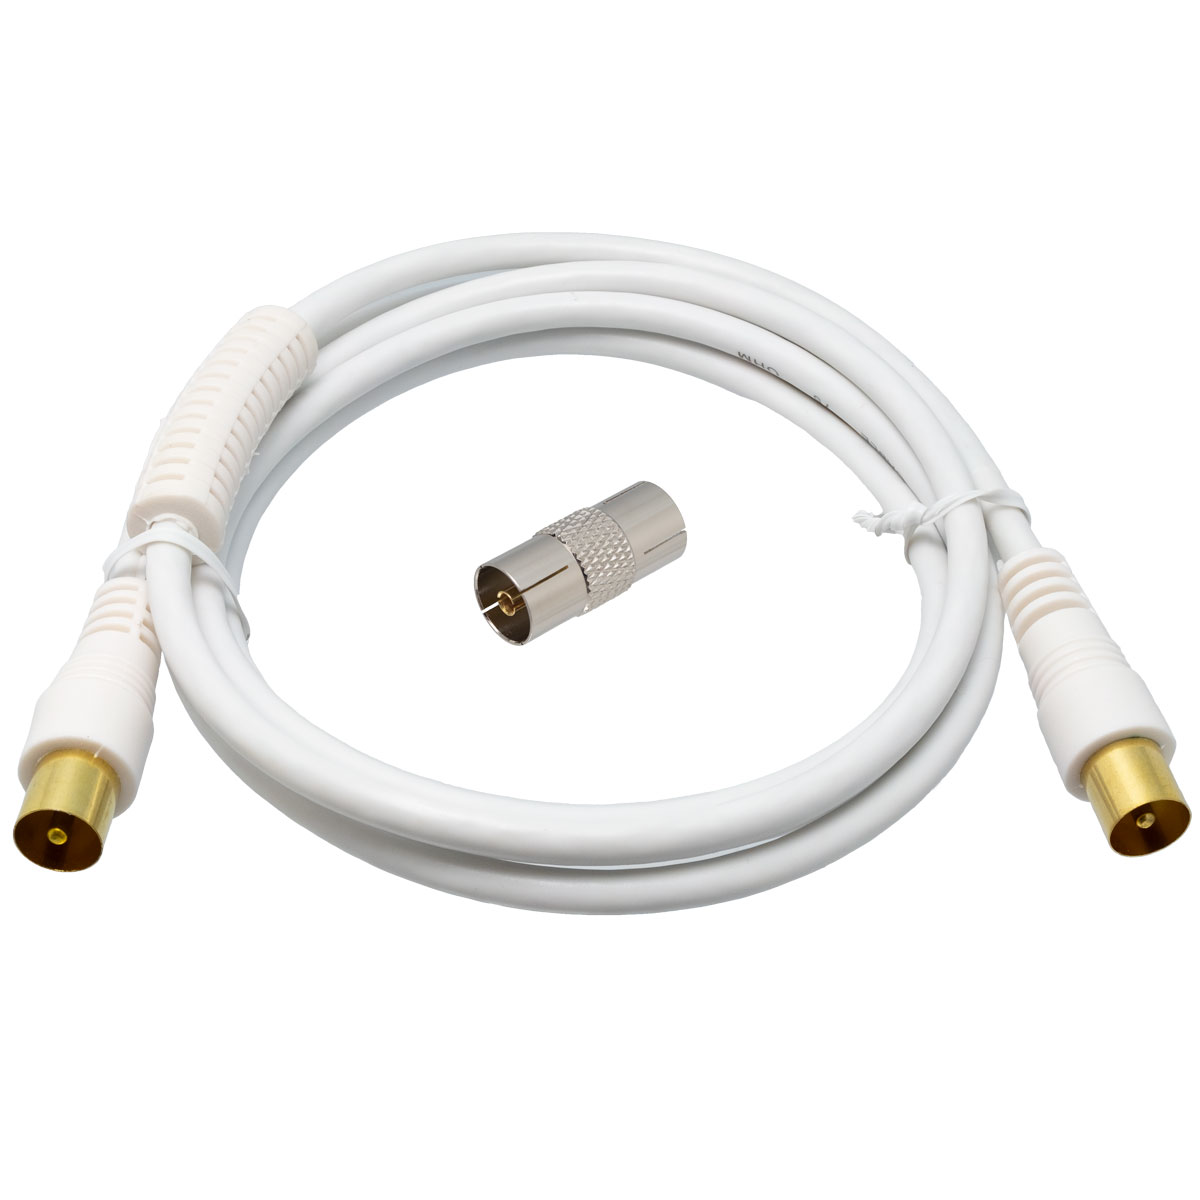 Kit antenna COAXIAL cable male - male 2,5 meters white with ferrites and female - female adapter